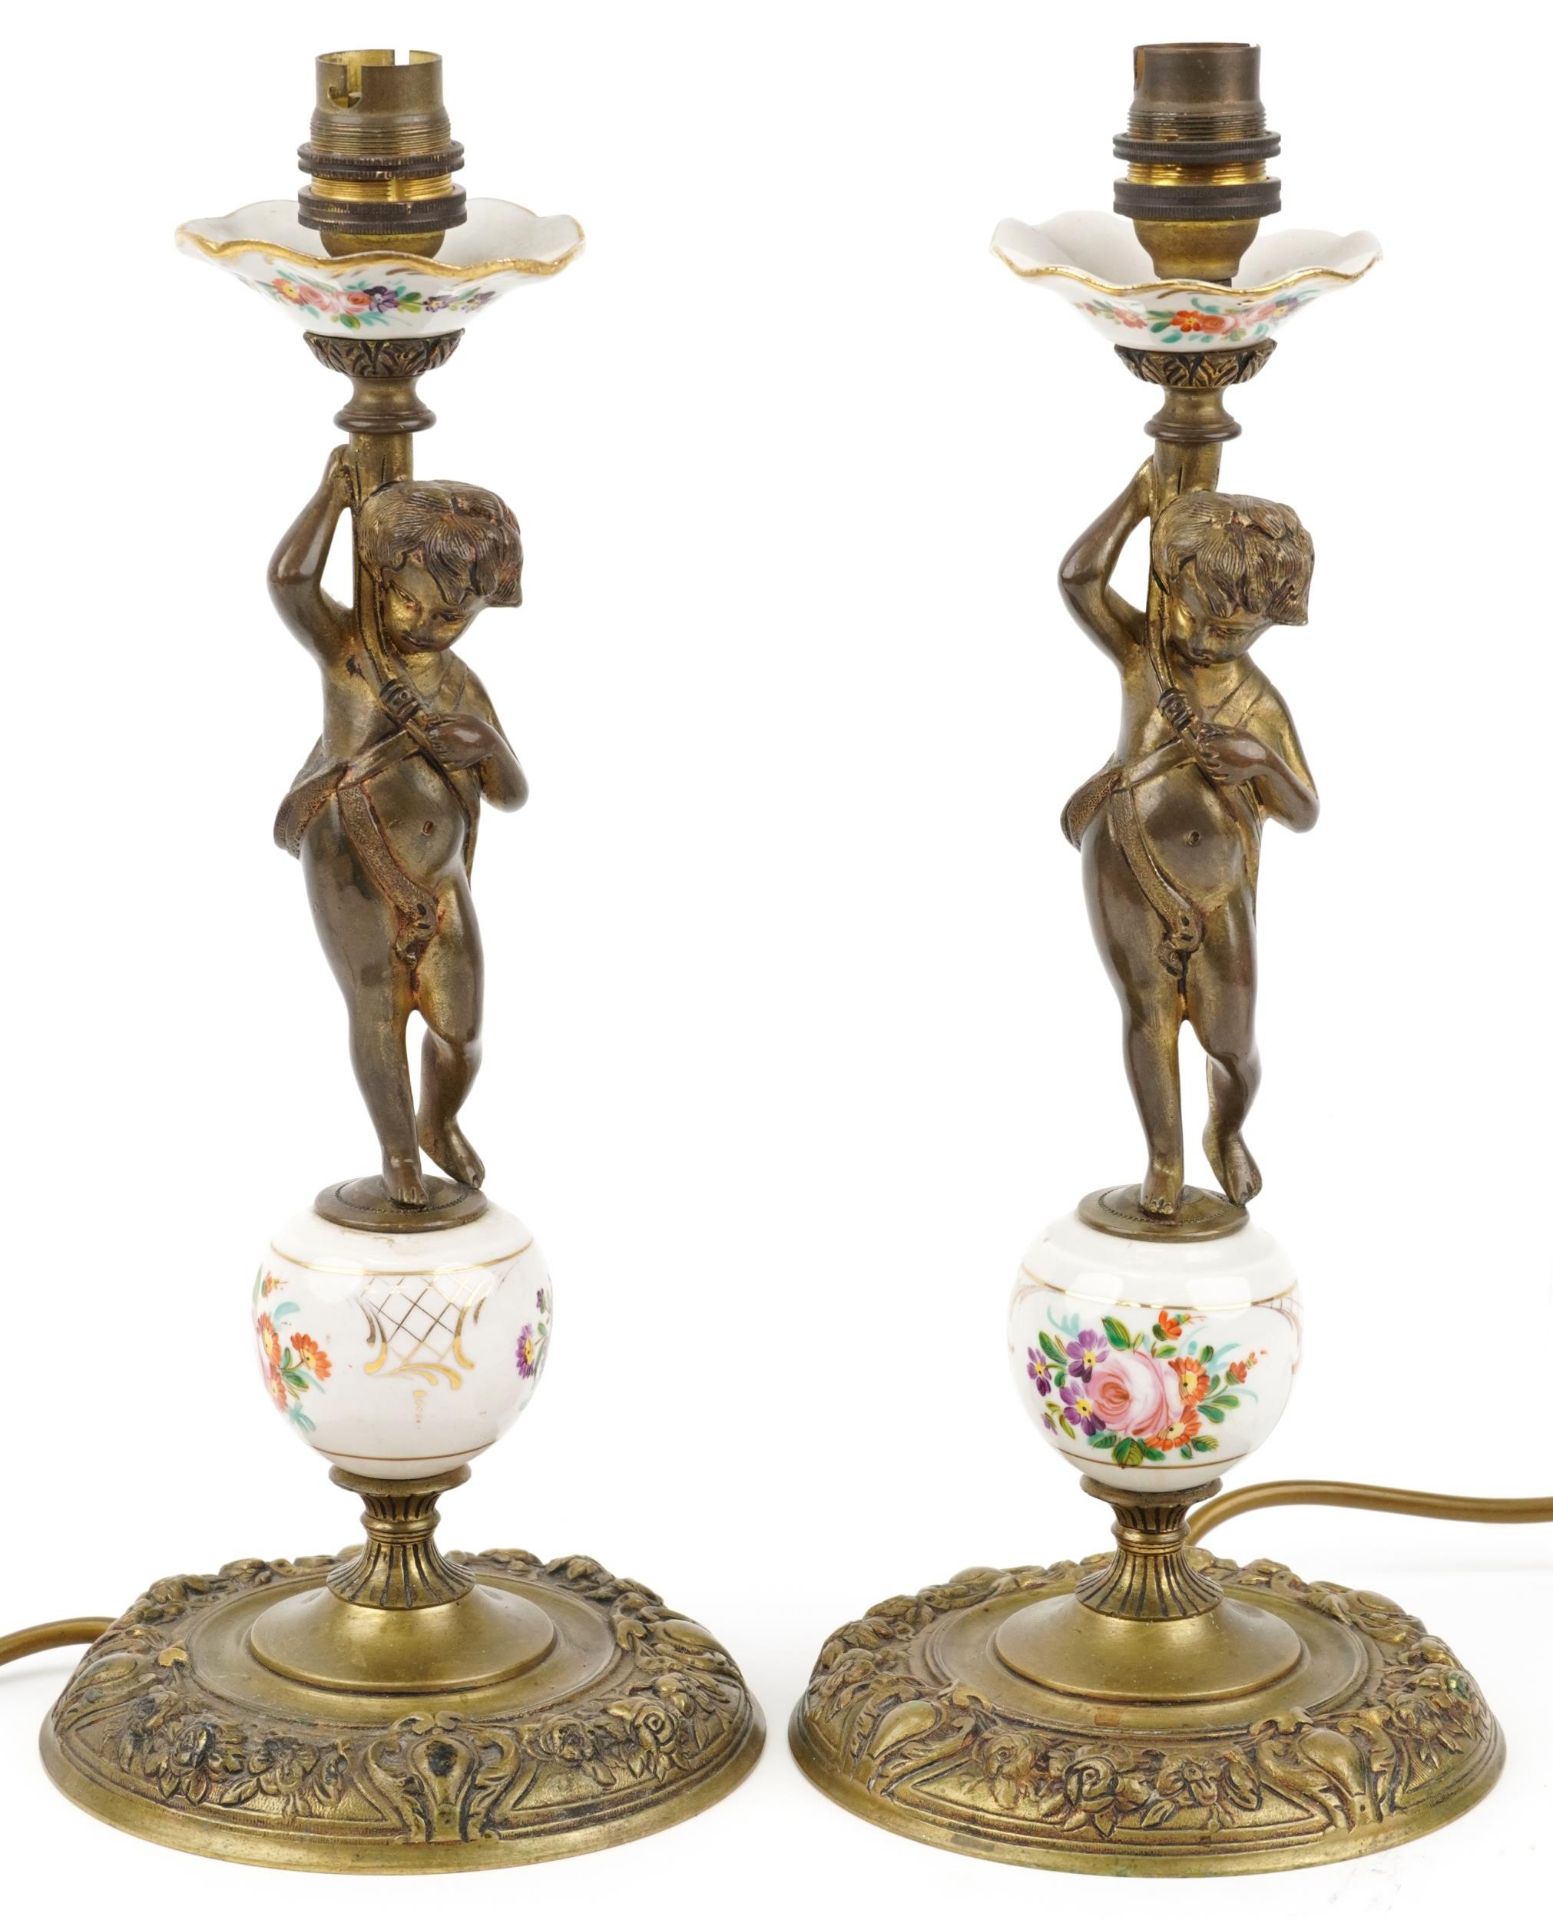 Pair of gilt brass and porcelain Putti design candlesticks hand painted with flowers, each 35cm high